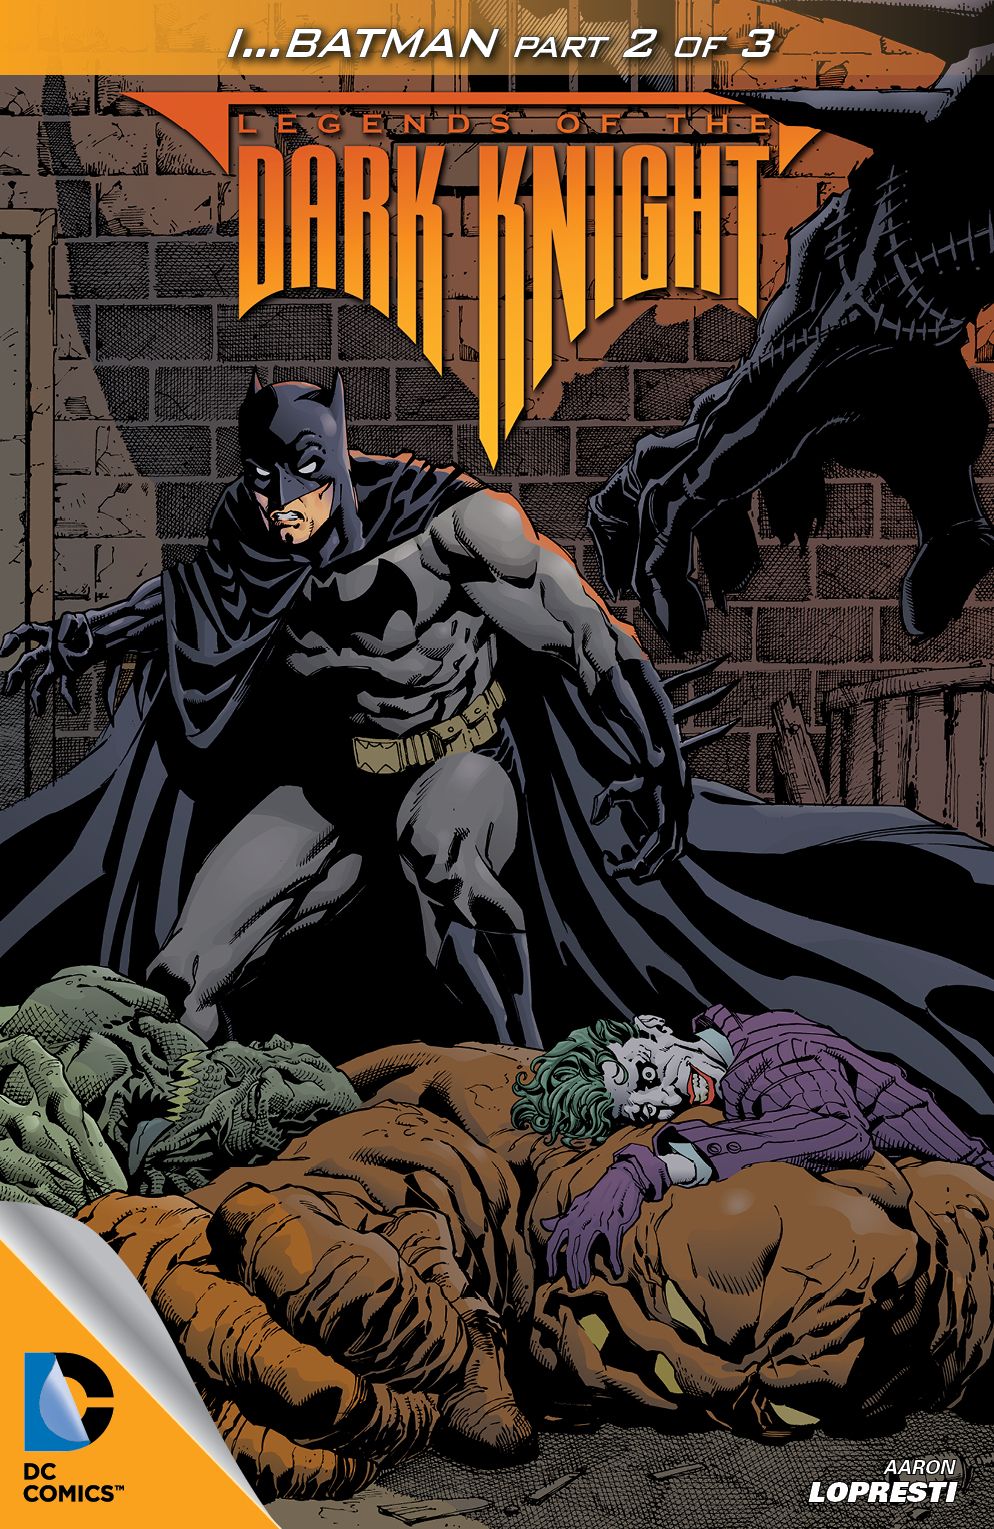 Legends of the Dark Knight #67 preview images